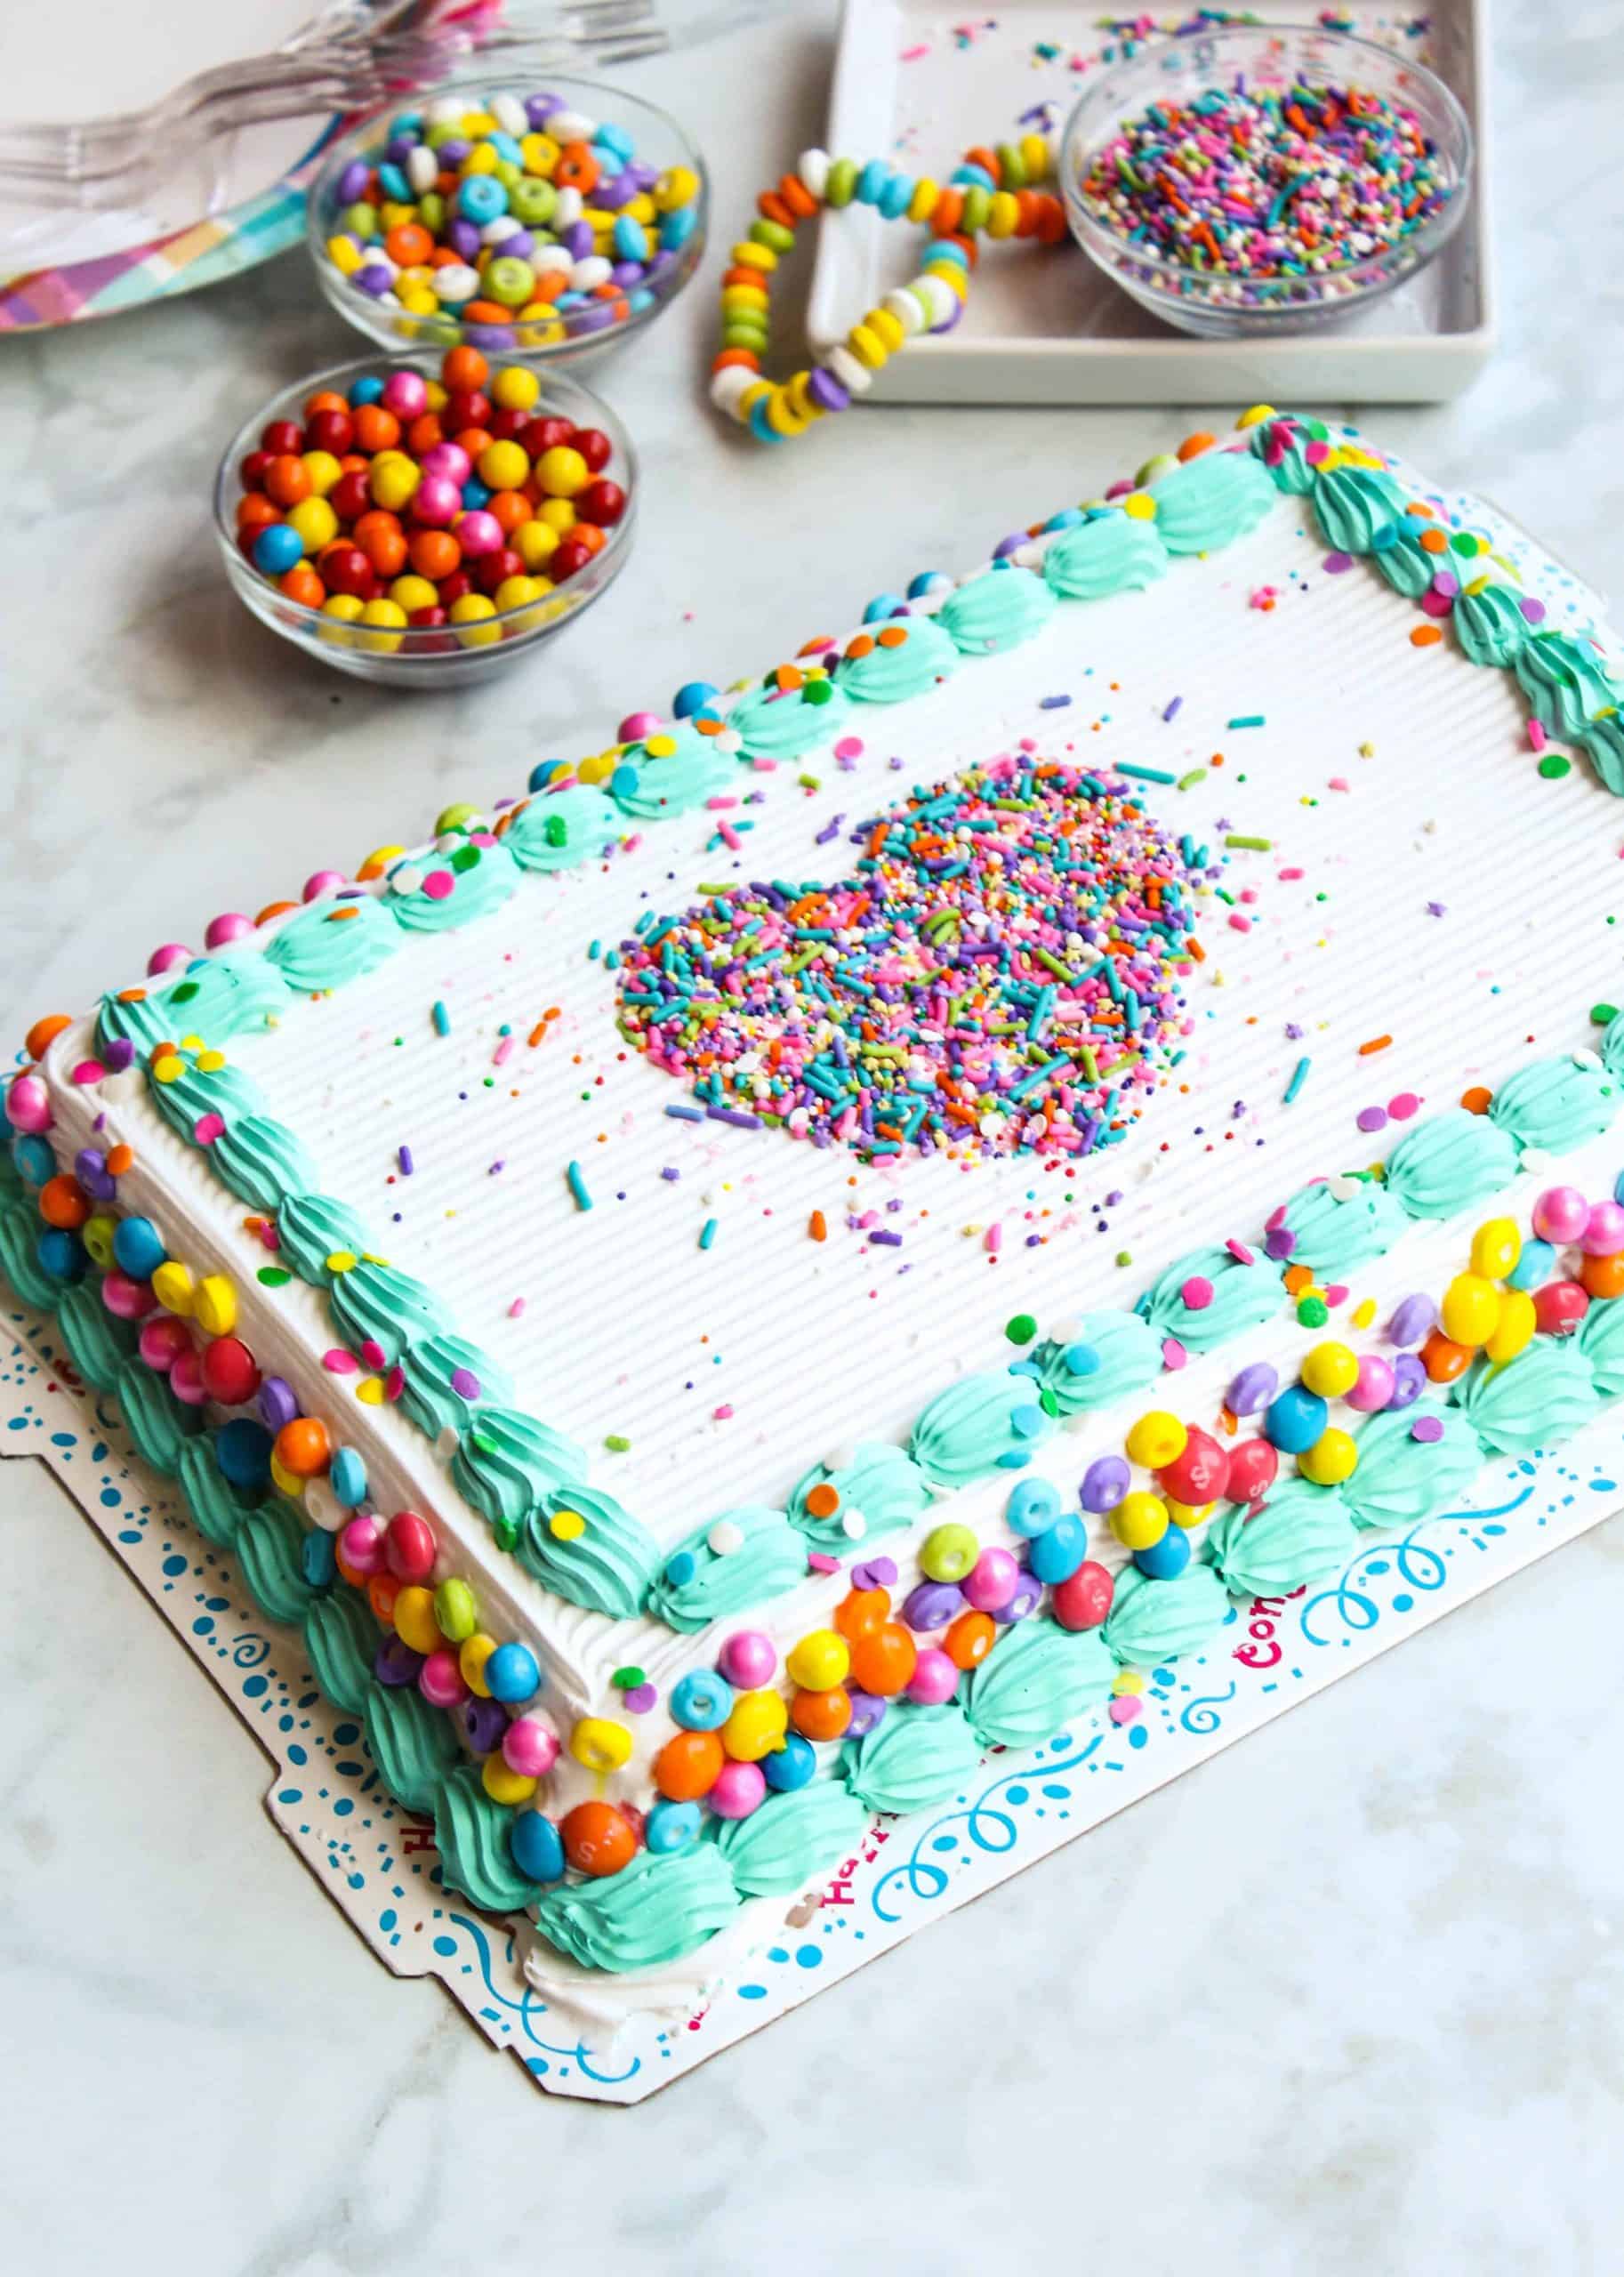 CONFETTI CAKE 🎉 Because December babies deserve love & a new cake design!  Don't forget about your Sagittarius & Capricorn cuties thi... | Instagram